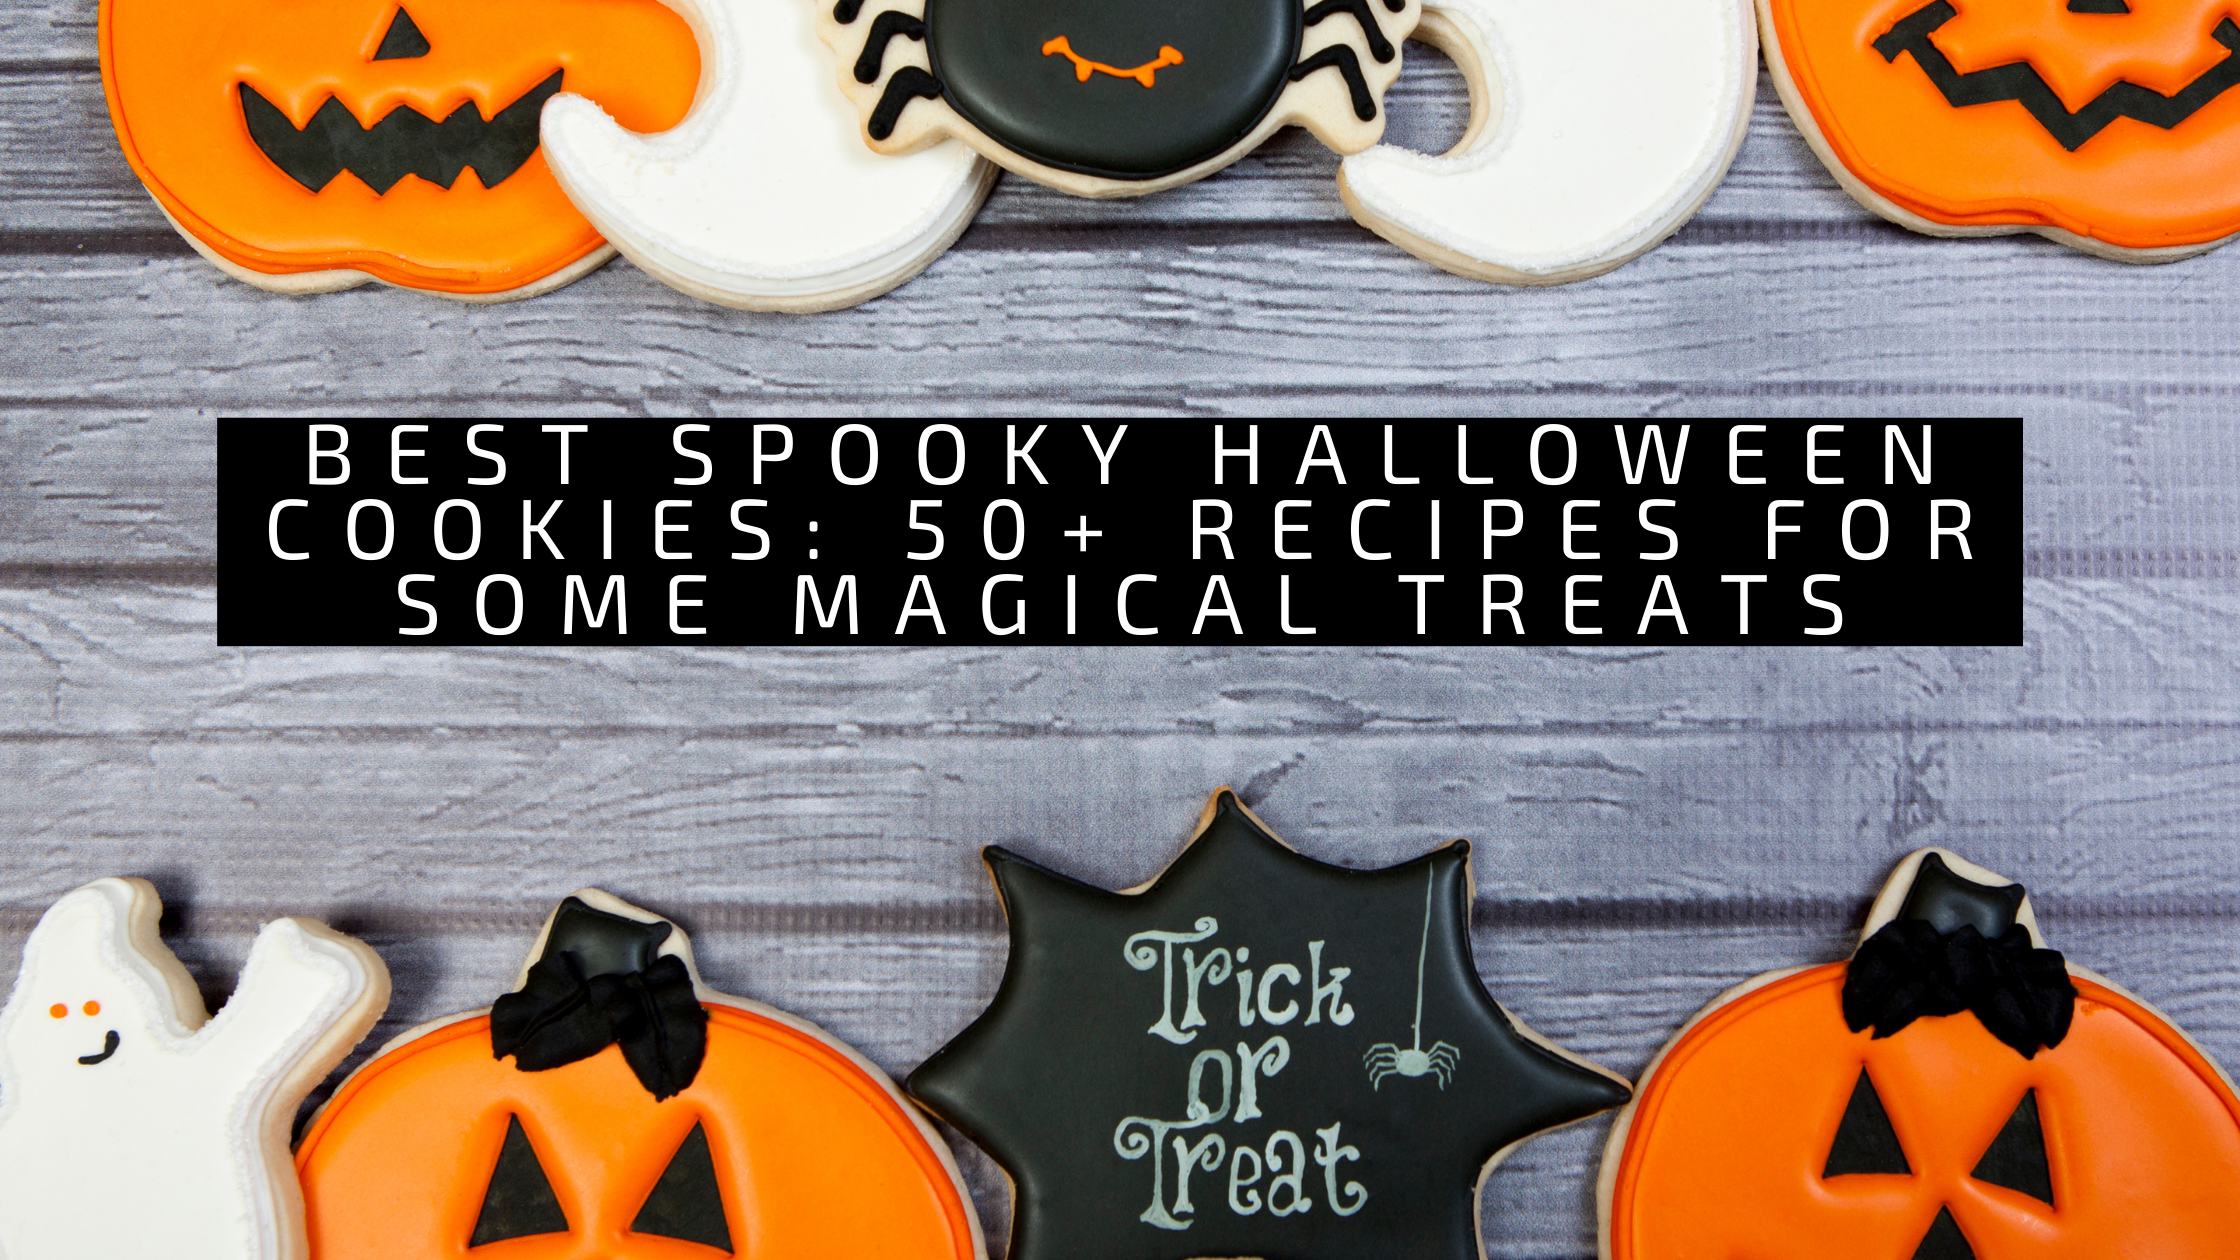 Best Spooky Halloween Cookies: 50+ Recipes for Some Magical Treats 8